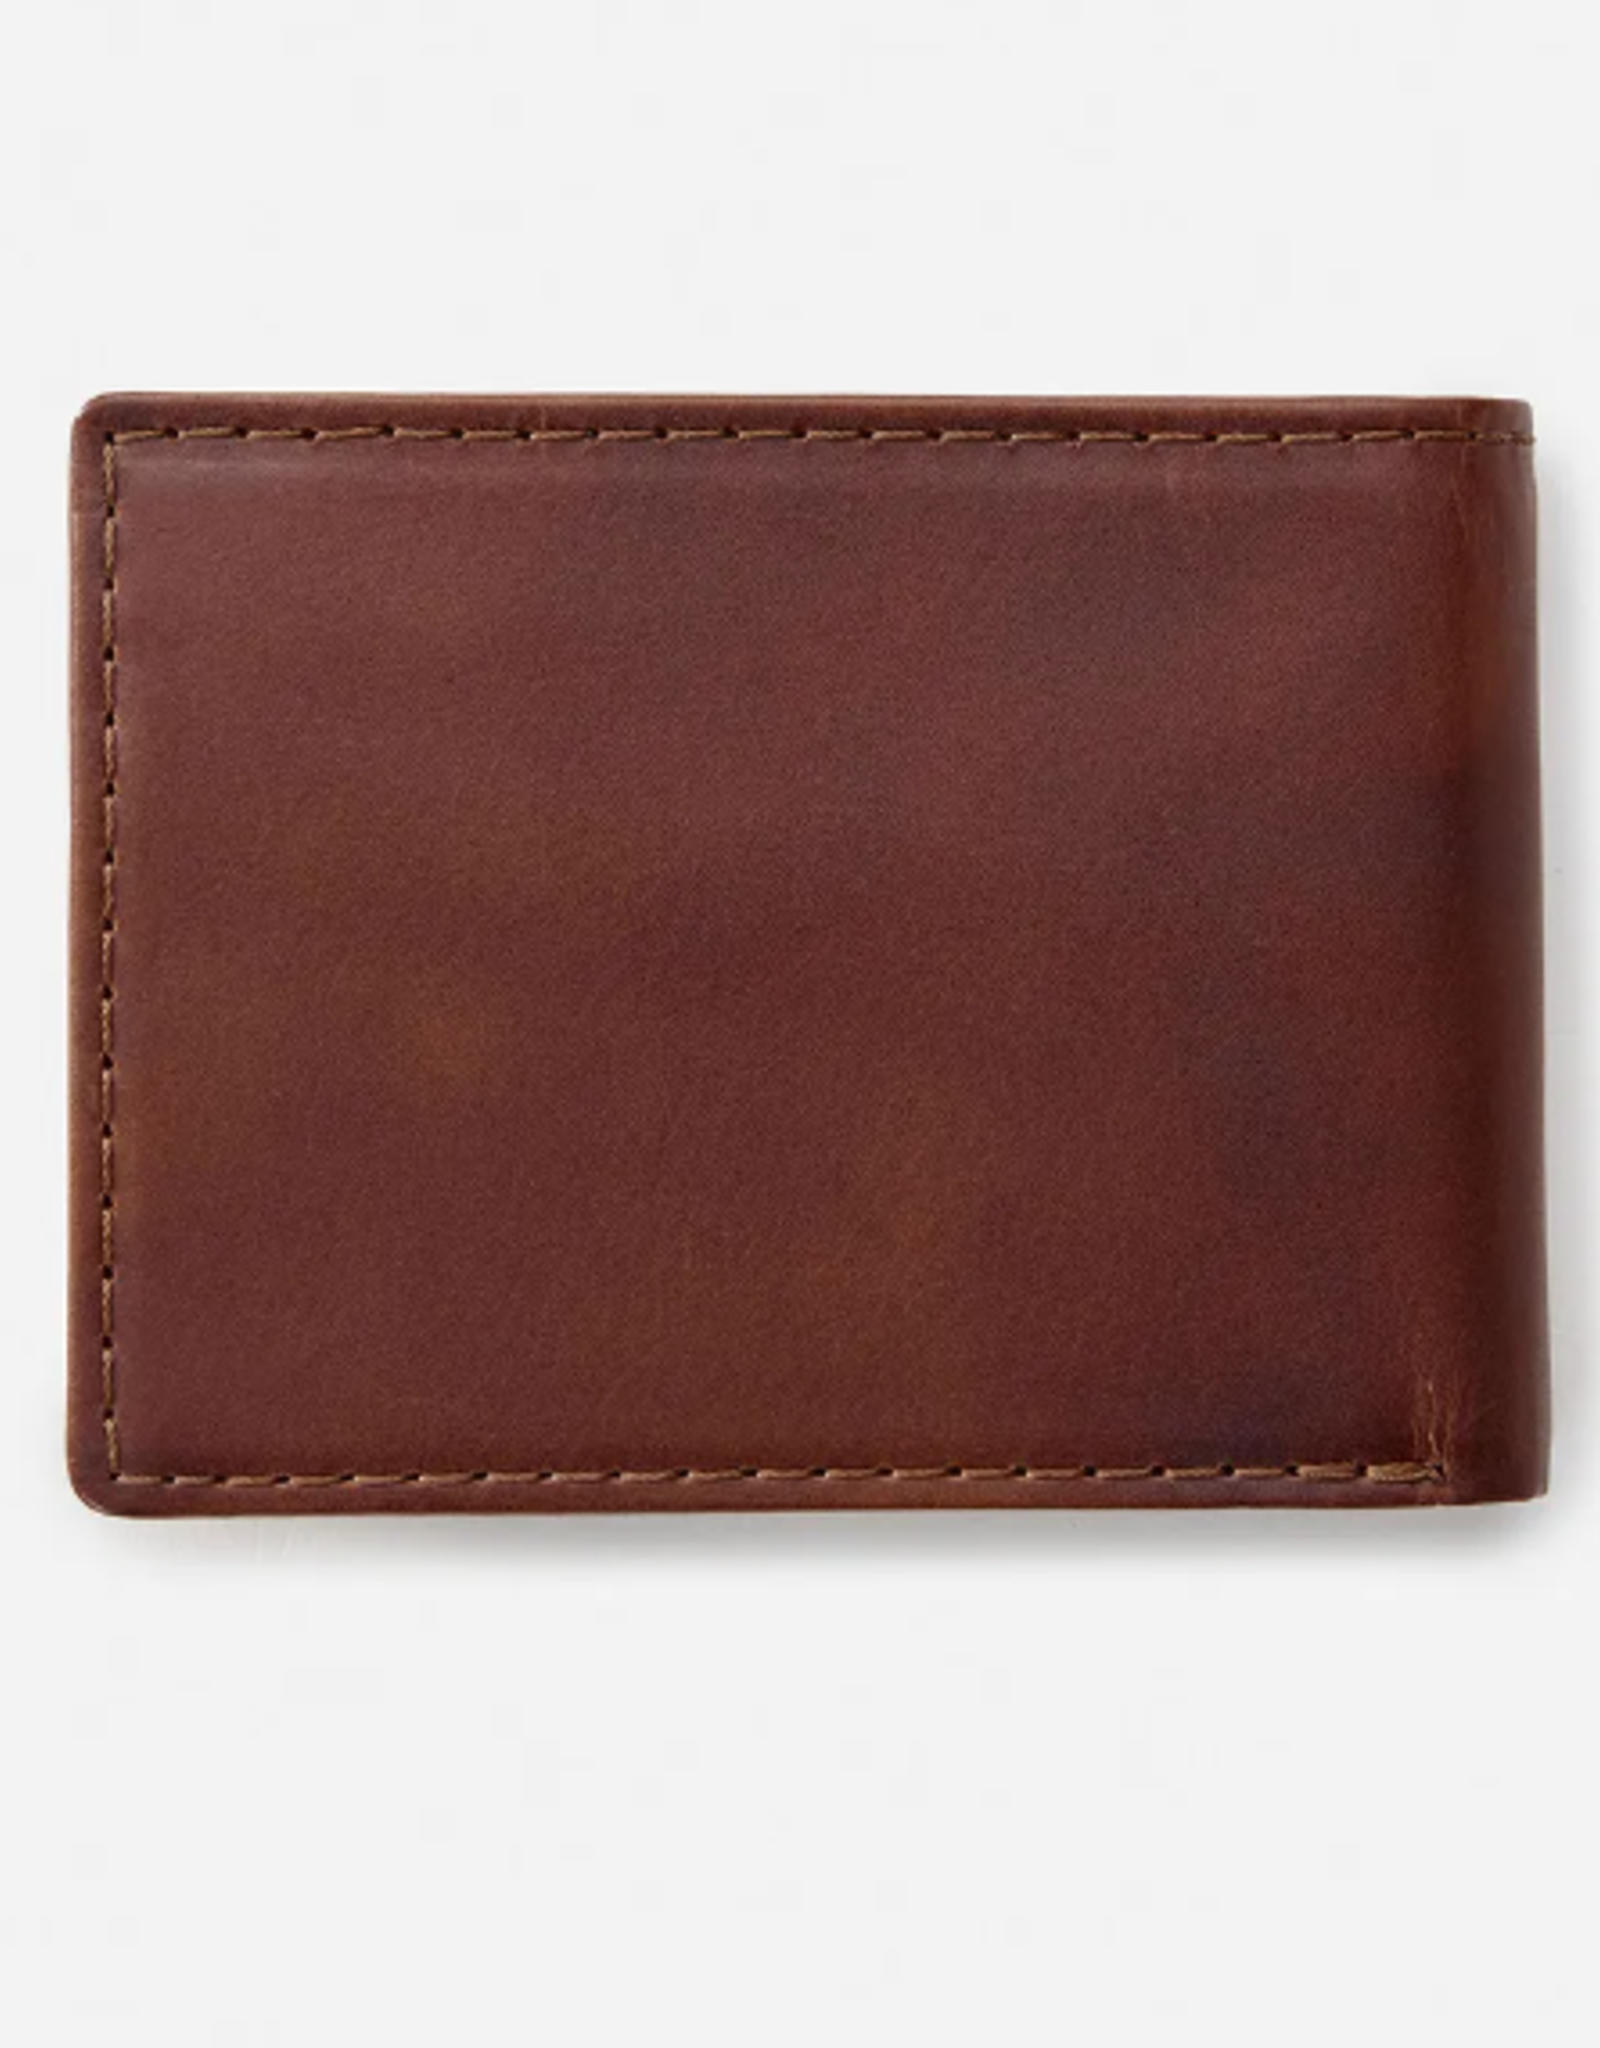 Execufold RFID All Day Wallet - Limestone Surf